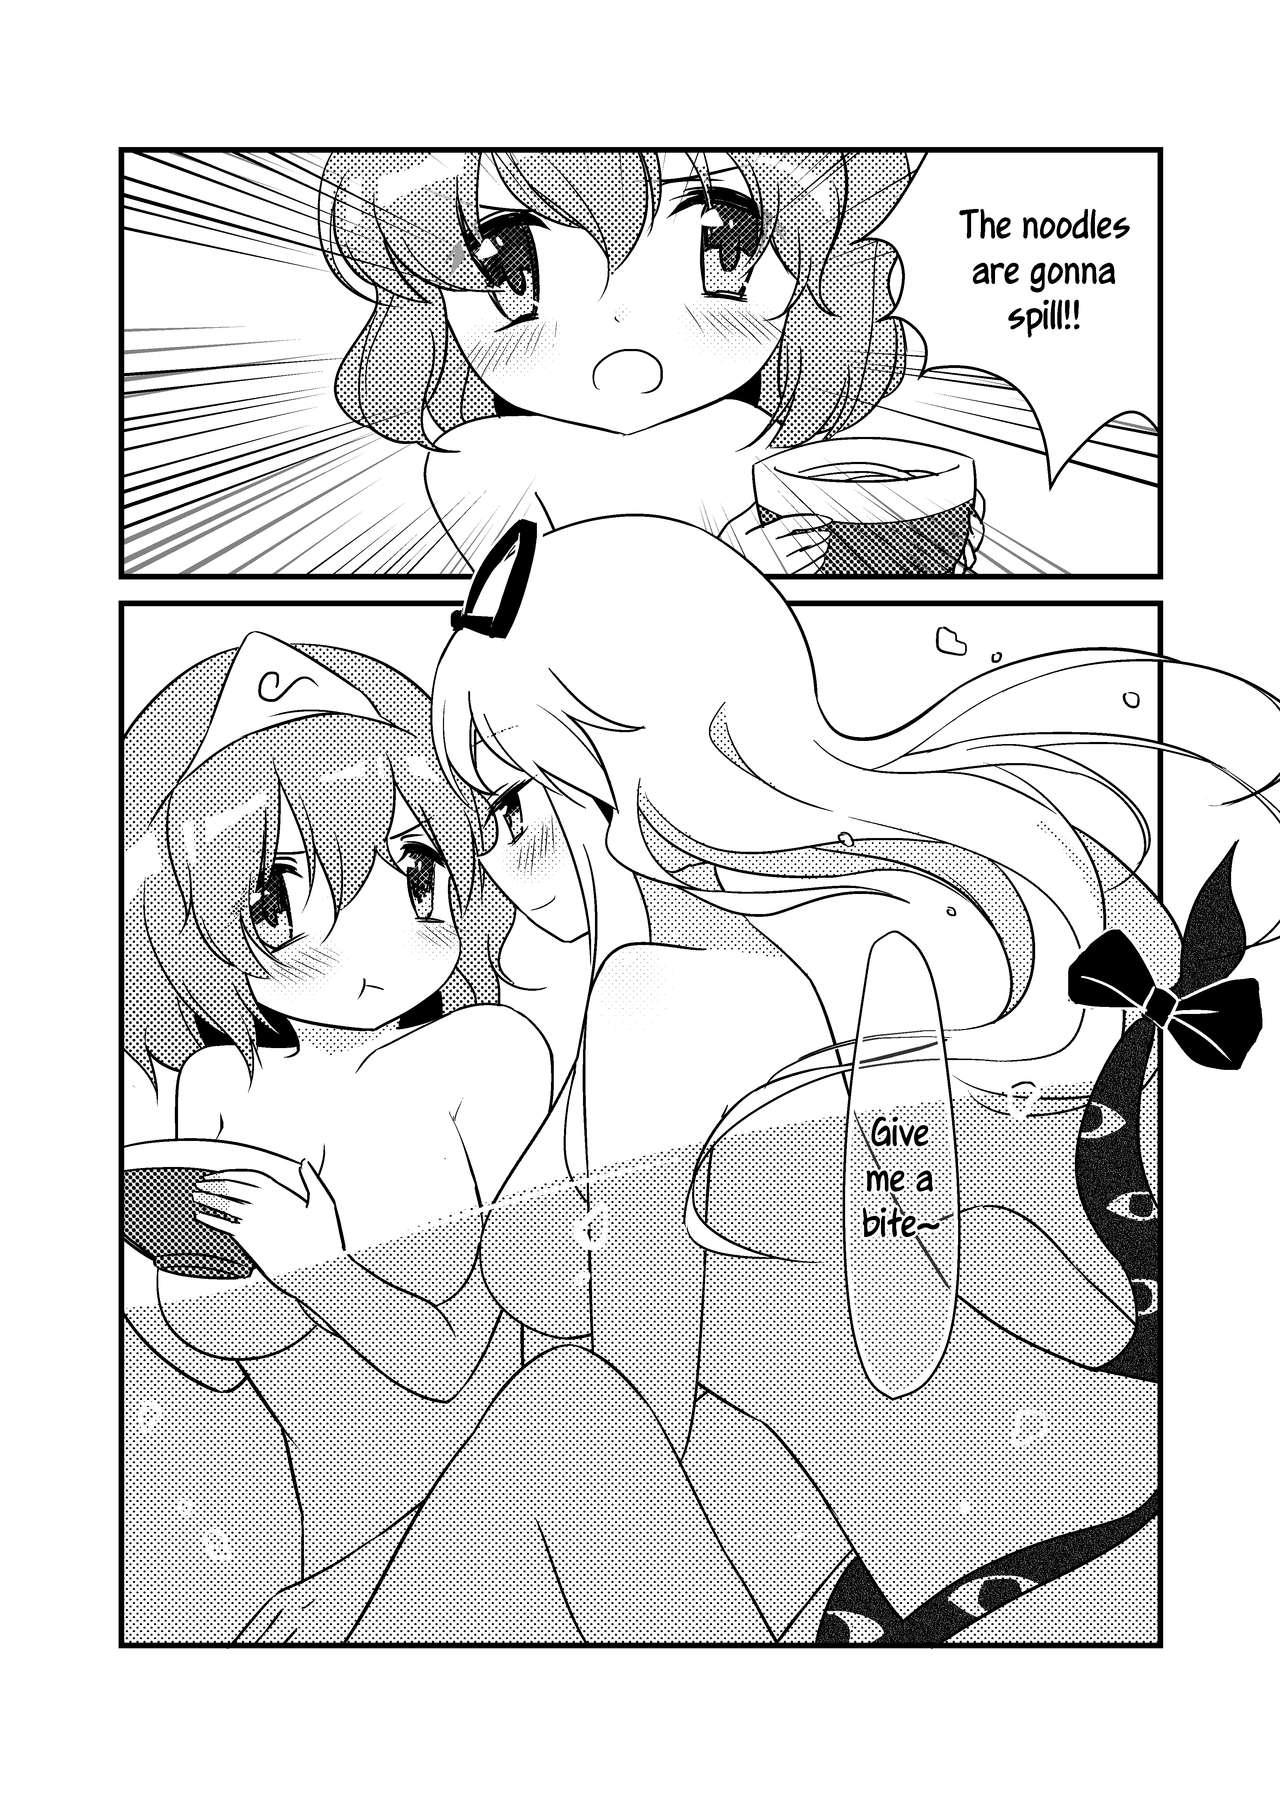 European ????一起泡温泉吧！ | ????Let's Soak in the Hot Spring! - Touhou project Outside - Page 6